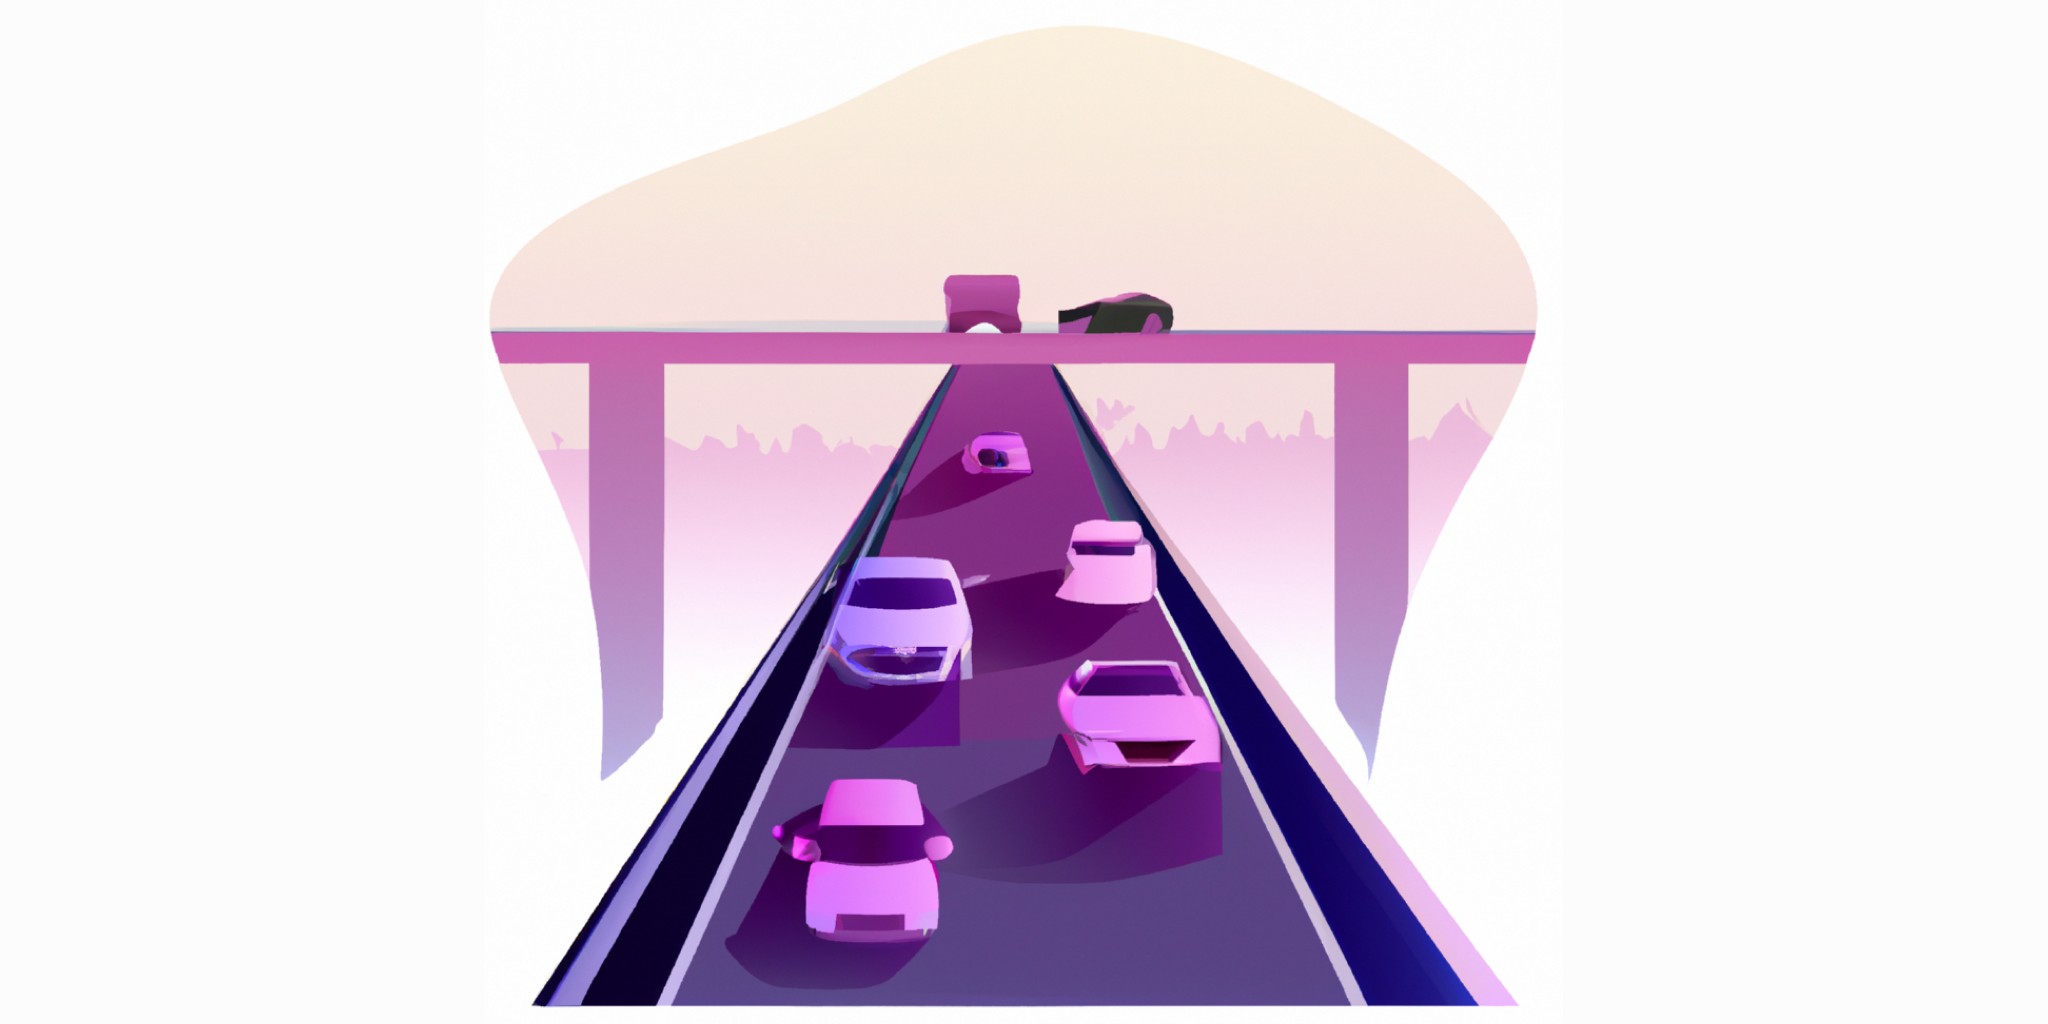 highway with 5 cars in flat illustration style with gradients and white background